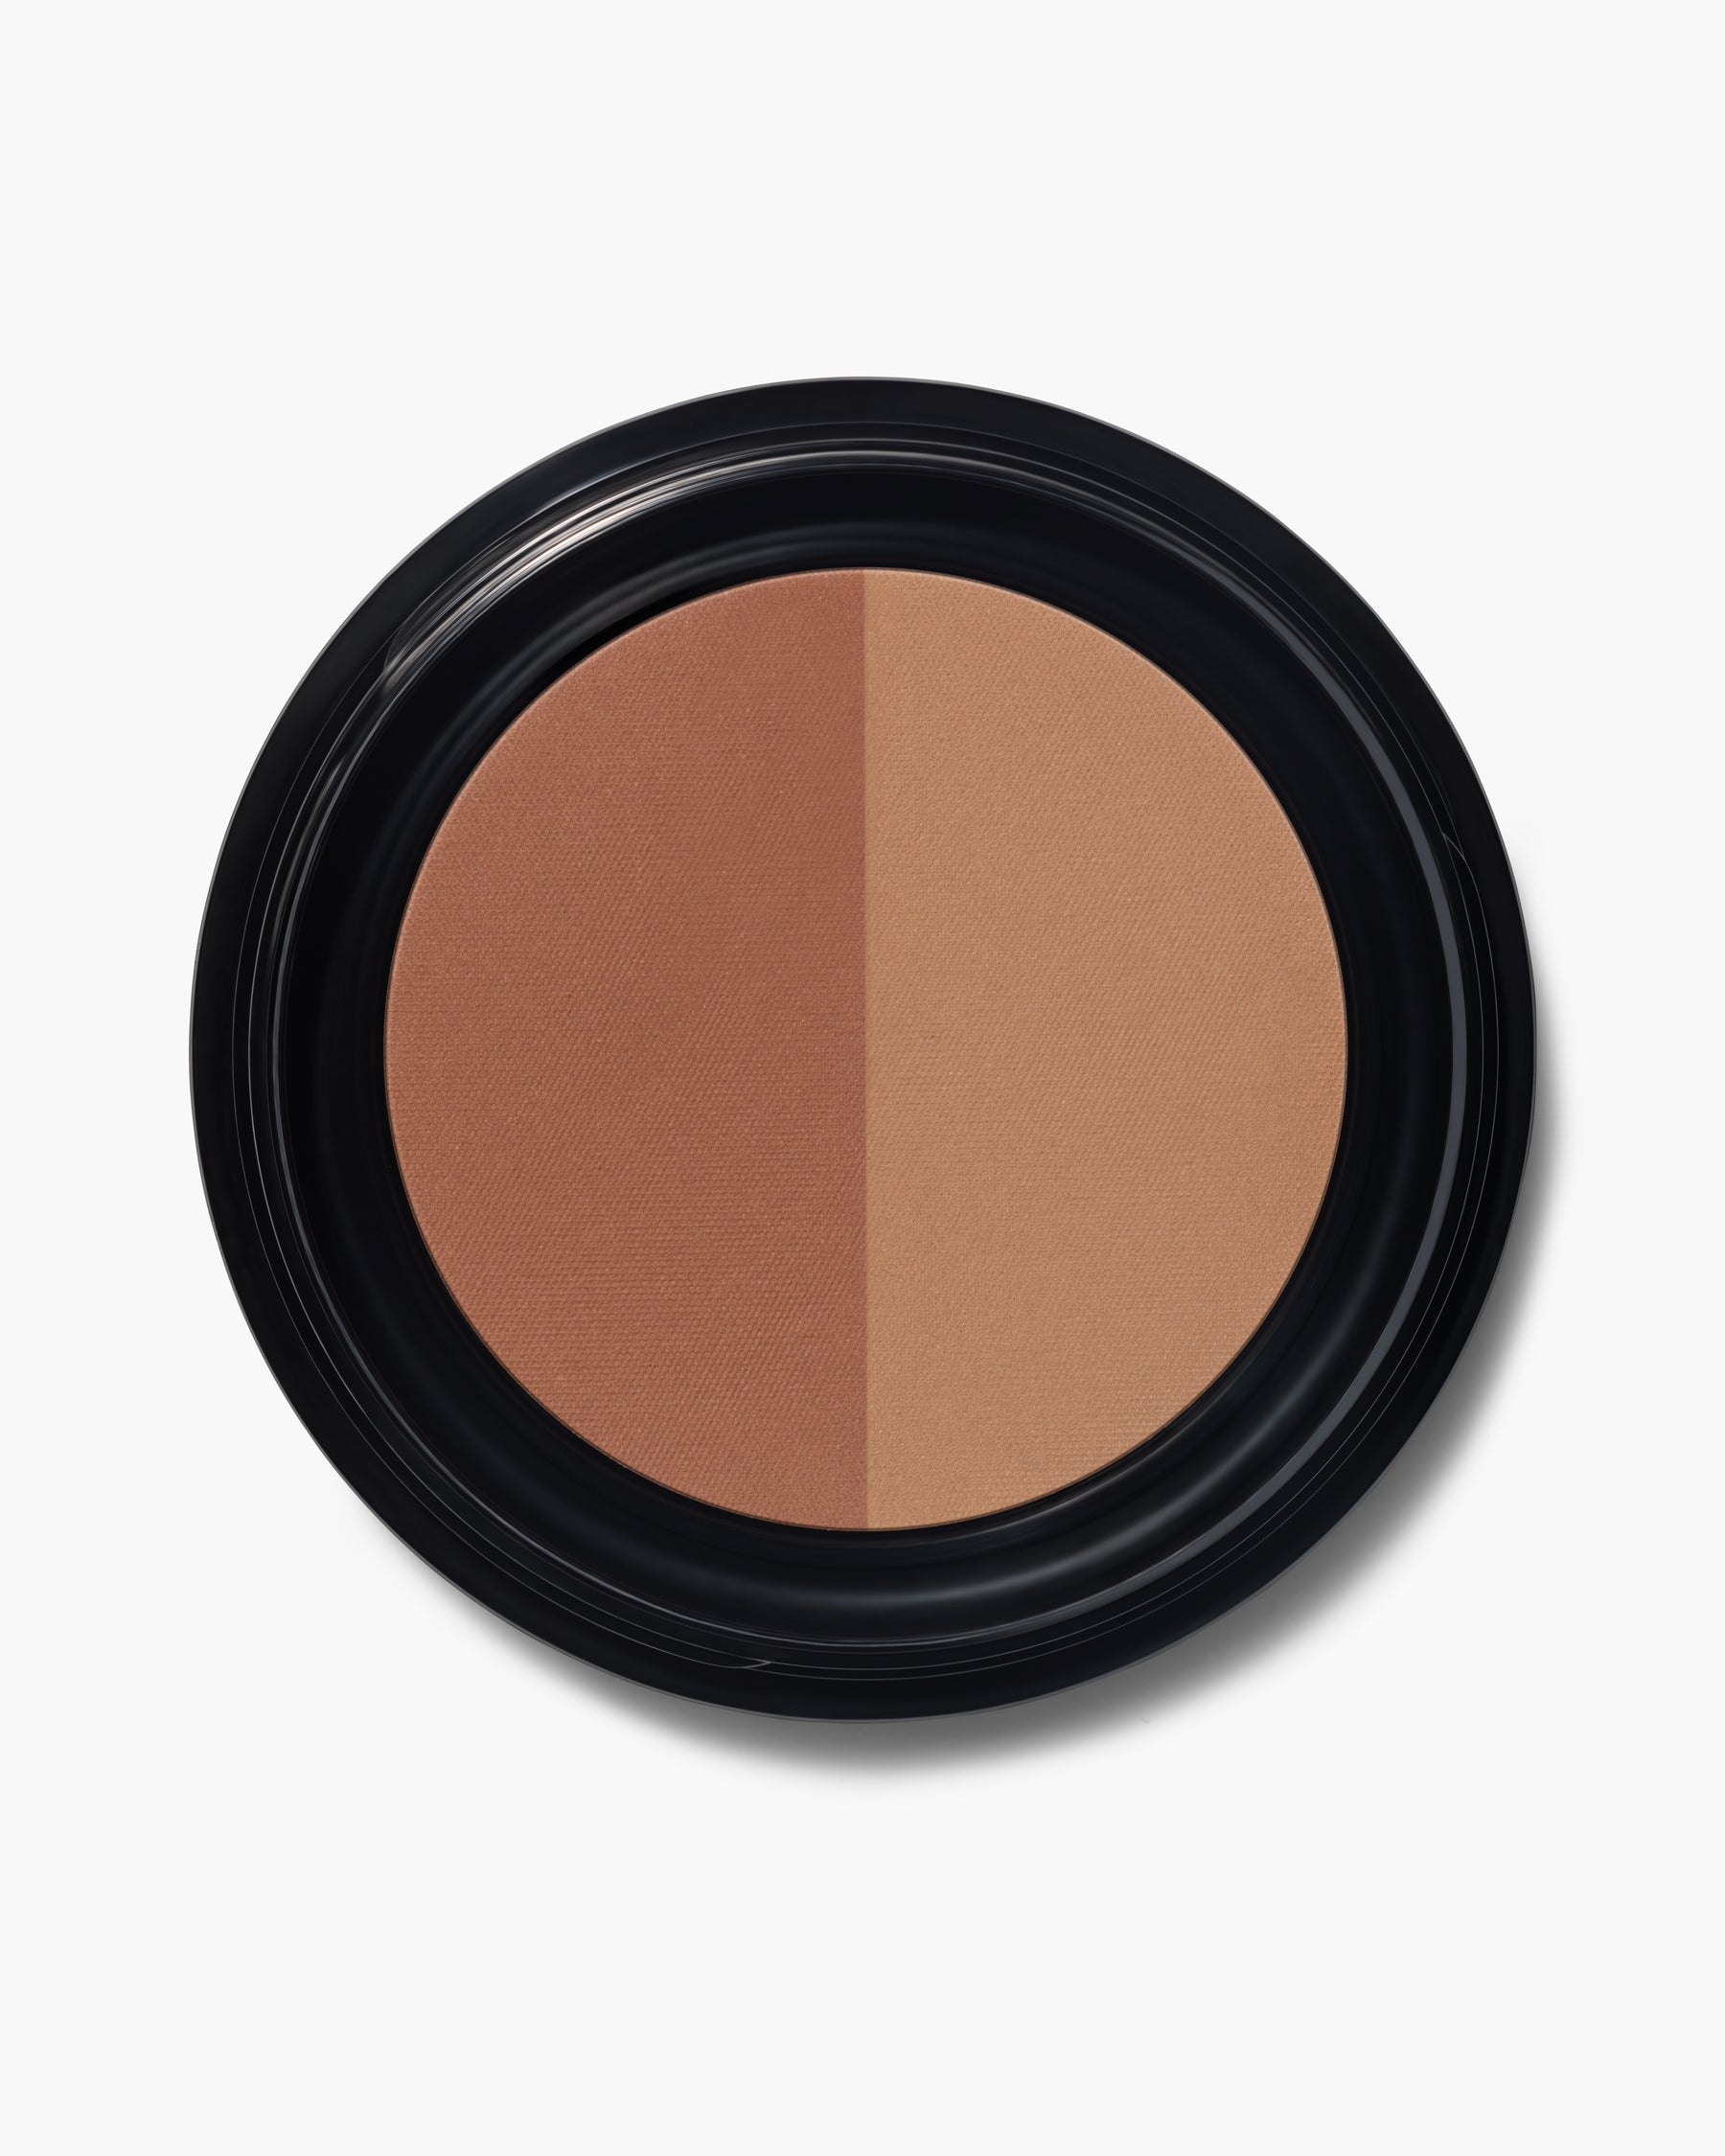 Custom Contour Duo is a matte and organic contour and bronzing powder.